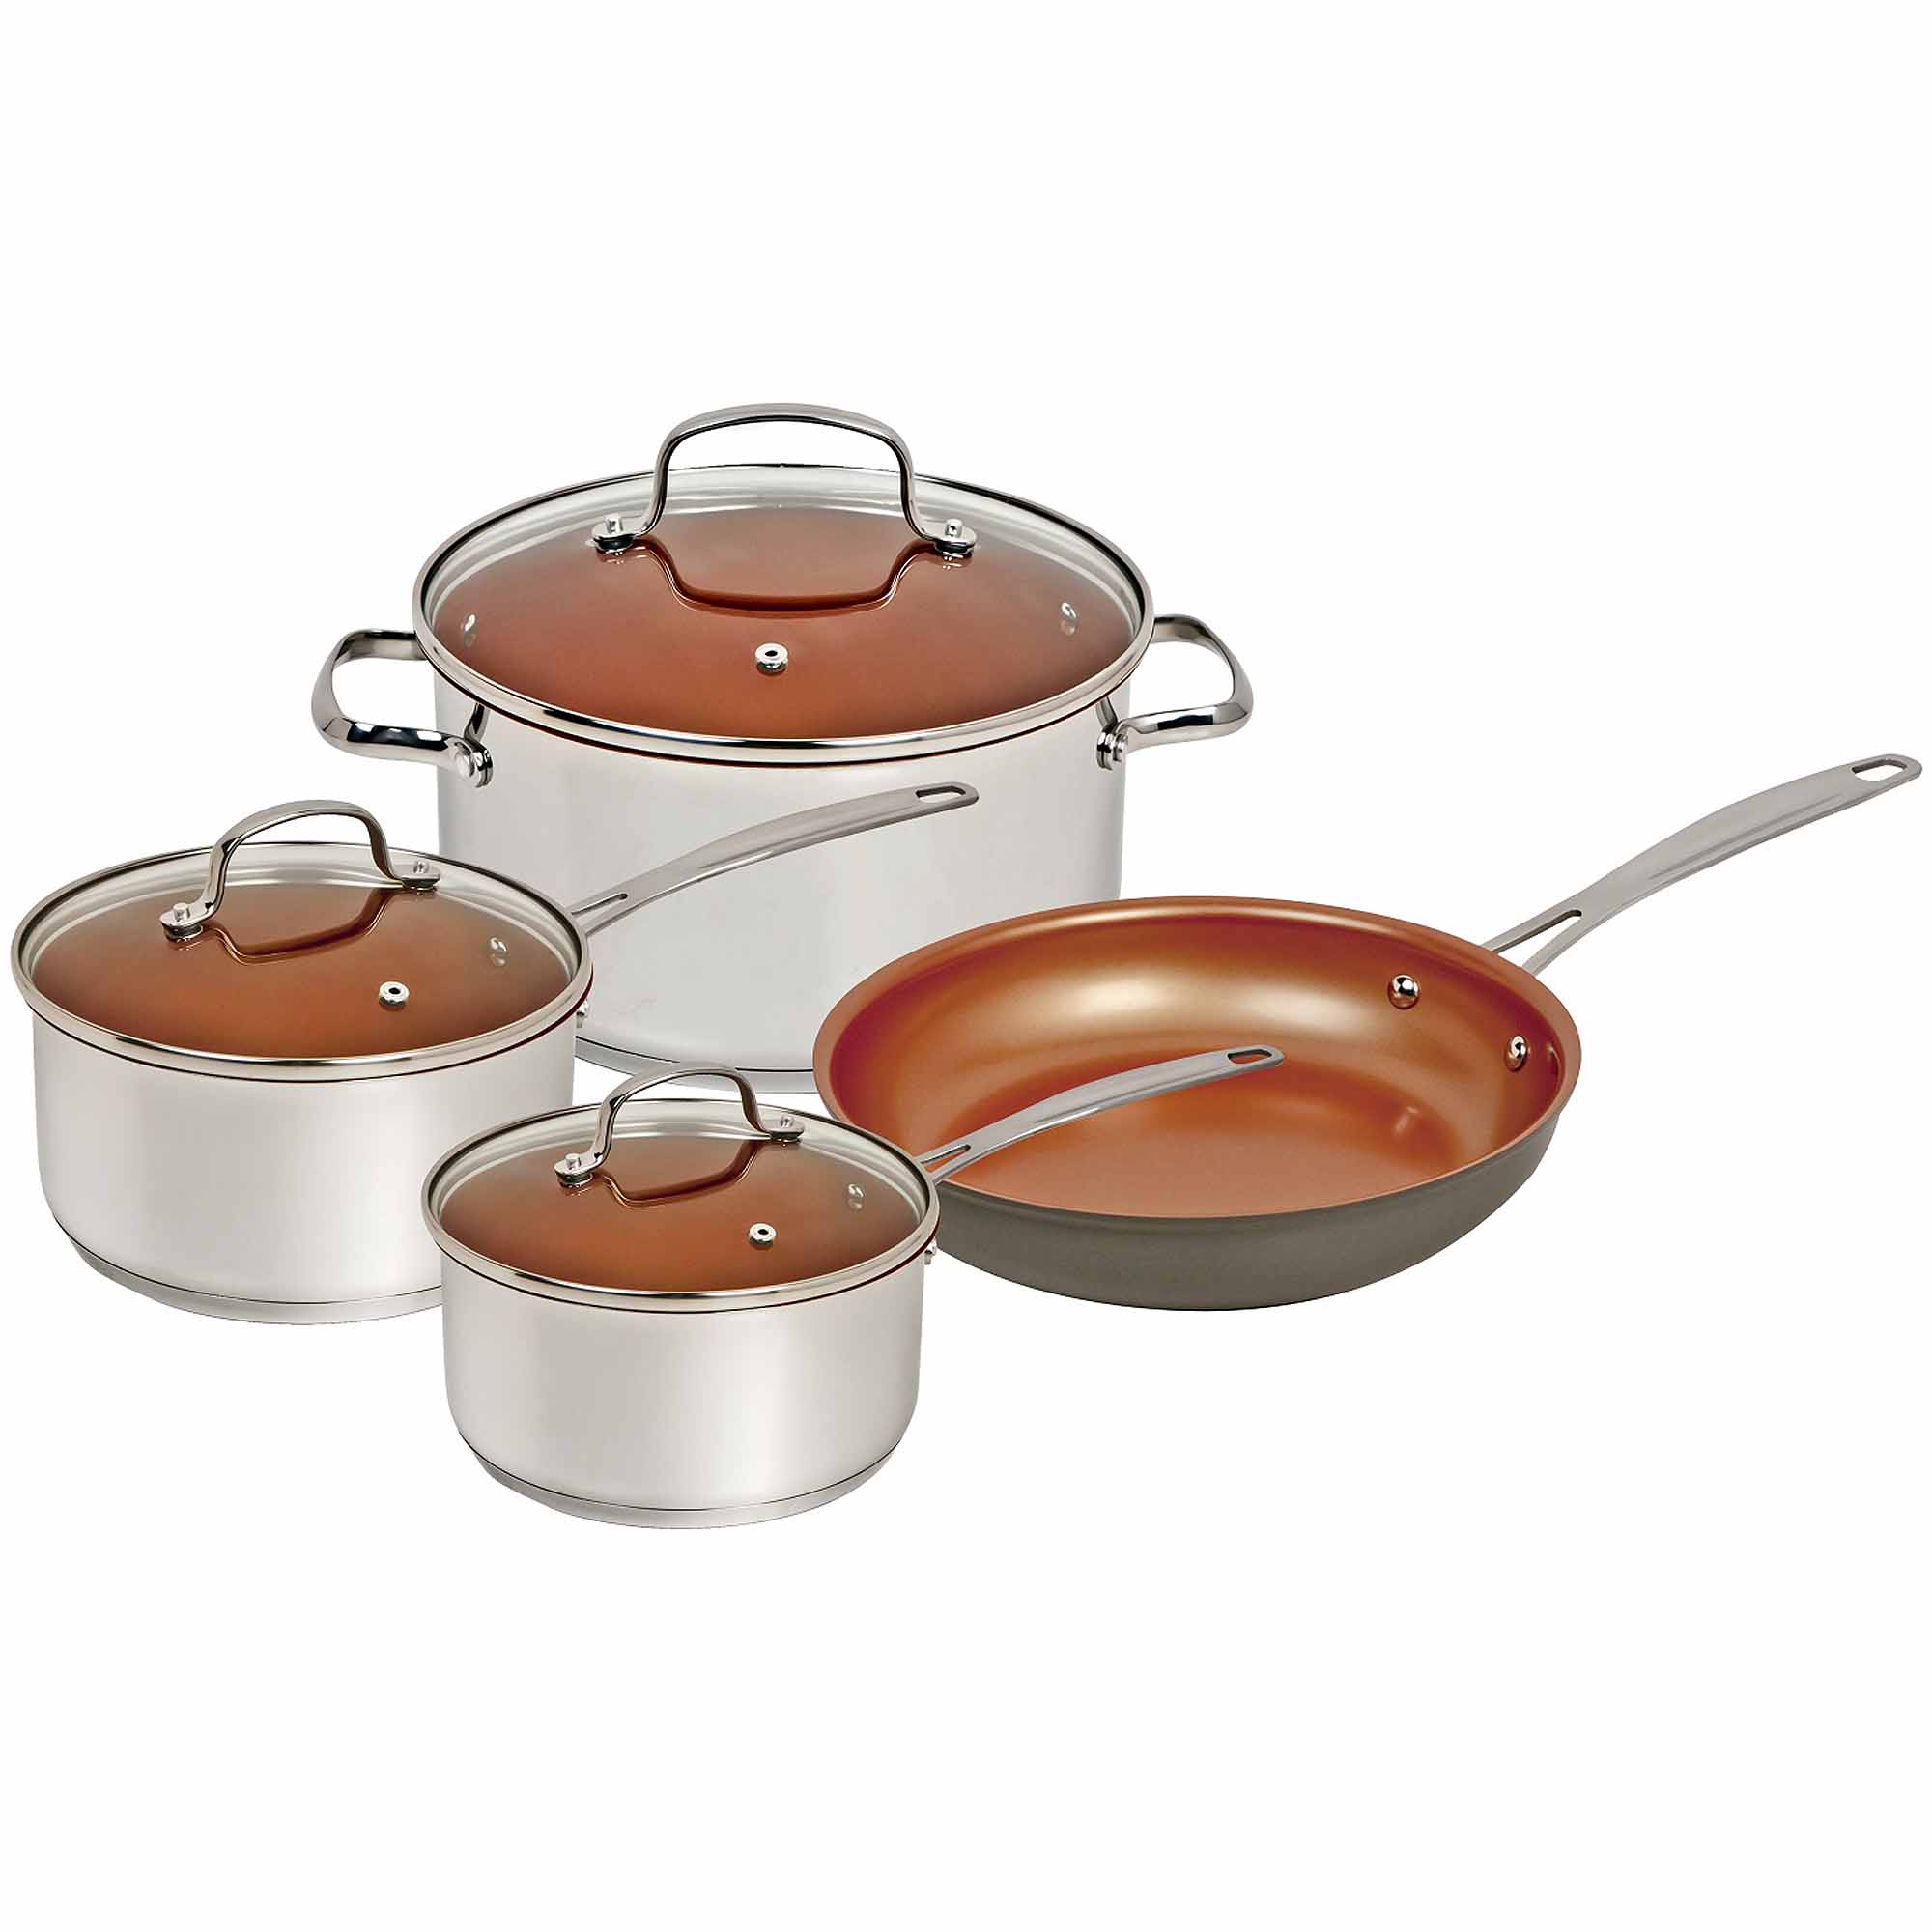 Nuwave Silver Cookware Set, 7 Piece - image 1 of 2